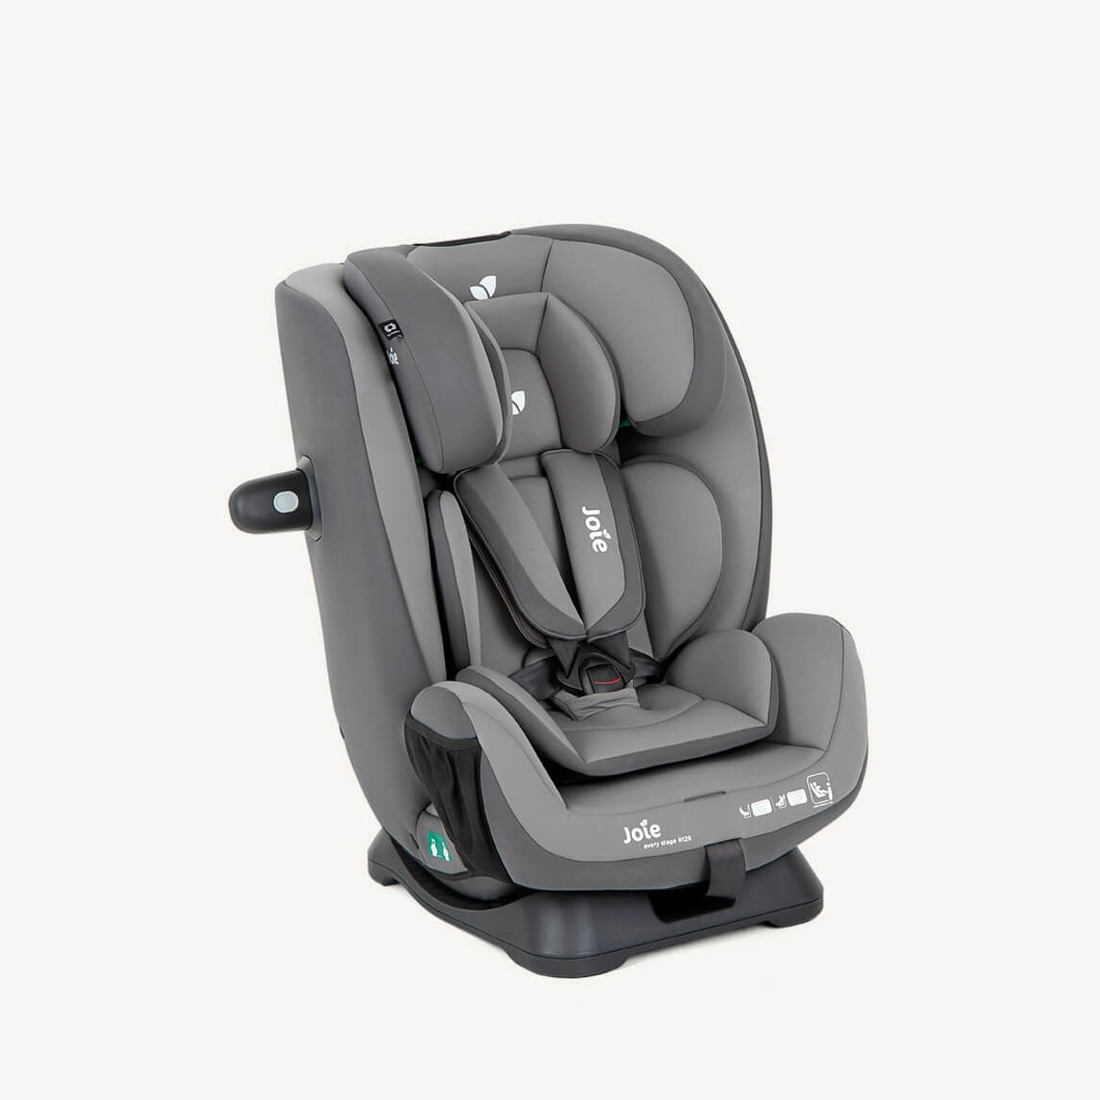 Joie Every Stage R129 Group 0+/1/2/3 Car Seat